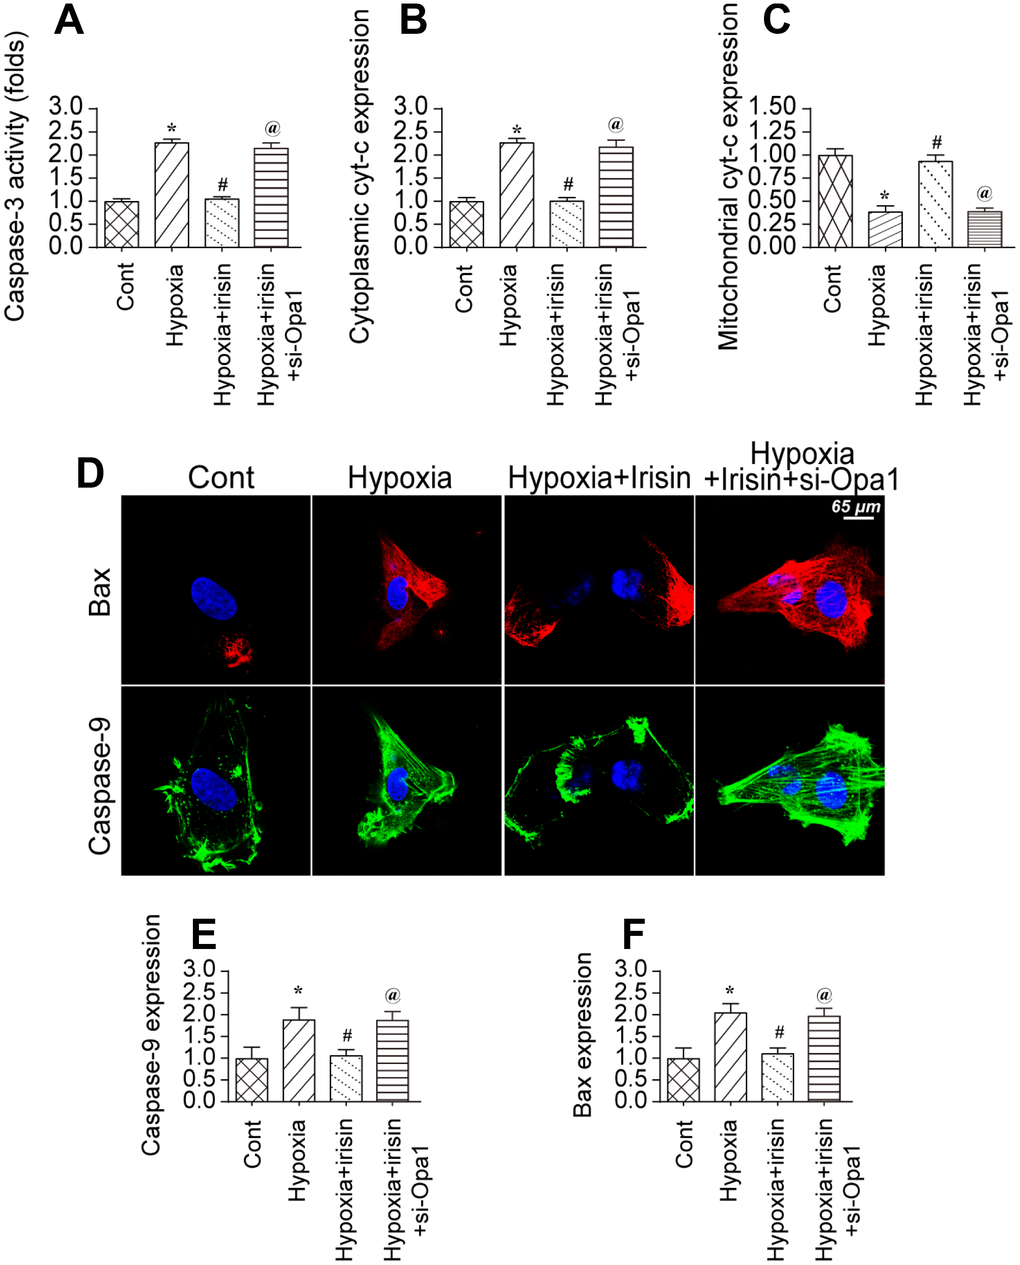 Opa1-induced mitophagy inhibits the mitochondrial apoptosis pathway. (A) Analysis of caspase-3 activity in cardiomyocytes by ELISA. (B, C) Western blot analysis of cyt-c levels in the cytoplasm and mitochondria. (D–F) Immunofluorescence analysis of Bax and caspase-9 expression in cardiomyocytes. *P 